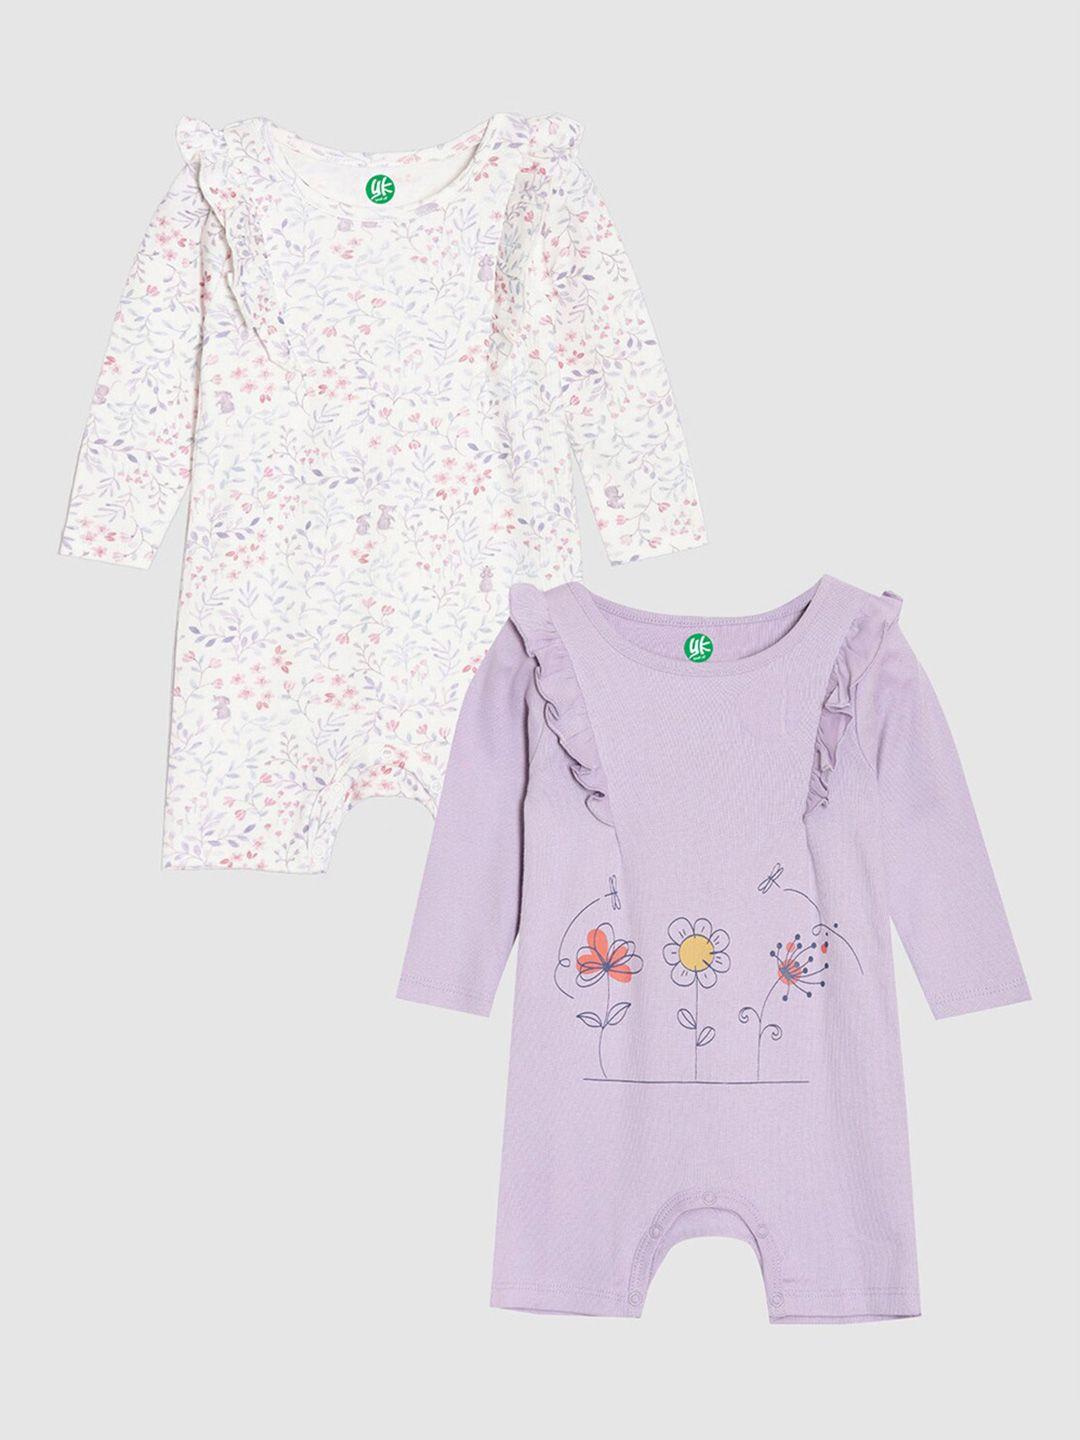 yk organic infant girls pack of 2 white and lavender printed pure organic cotton rompers